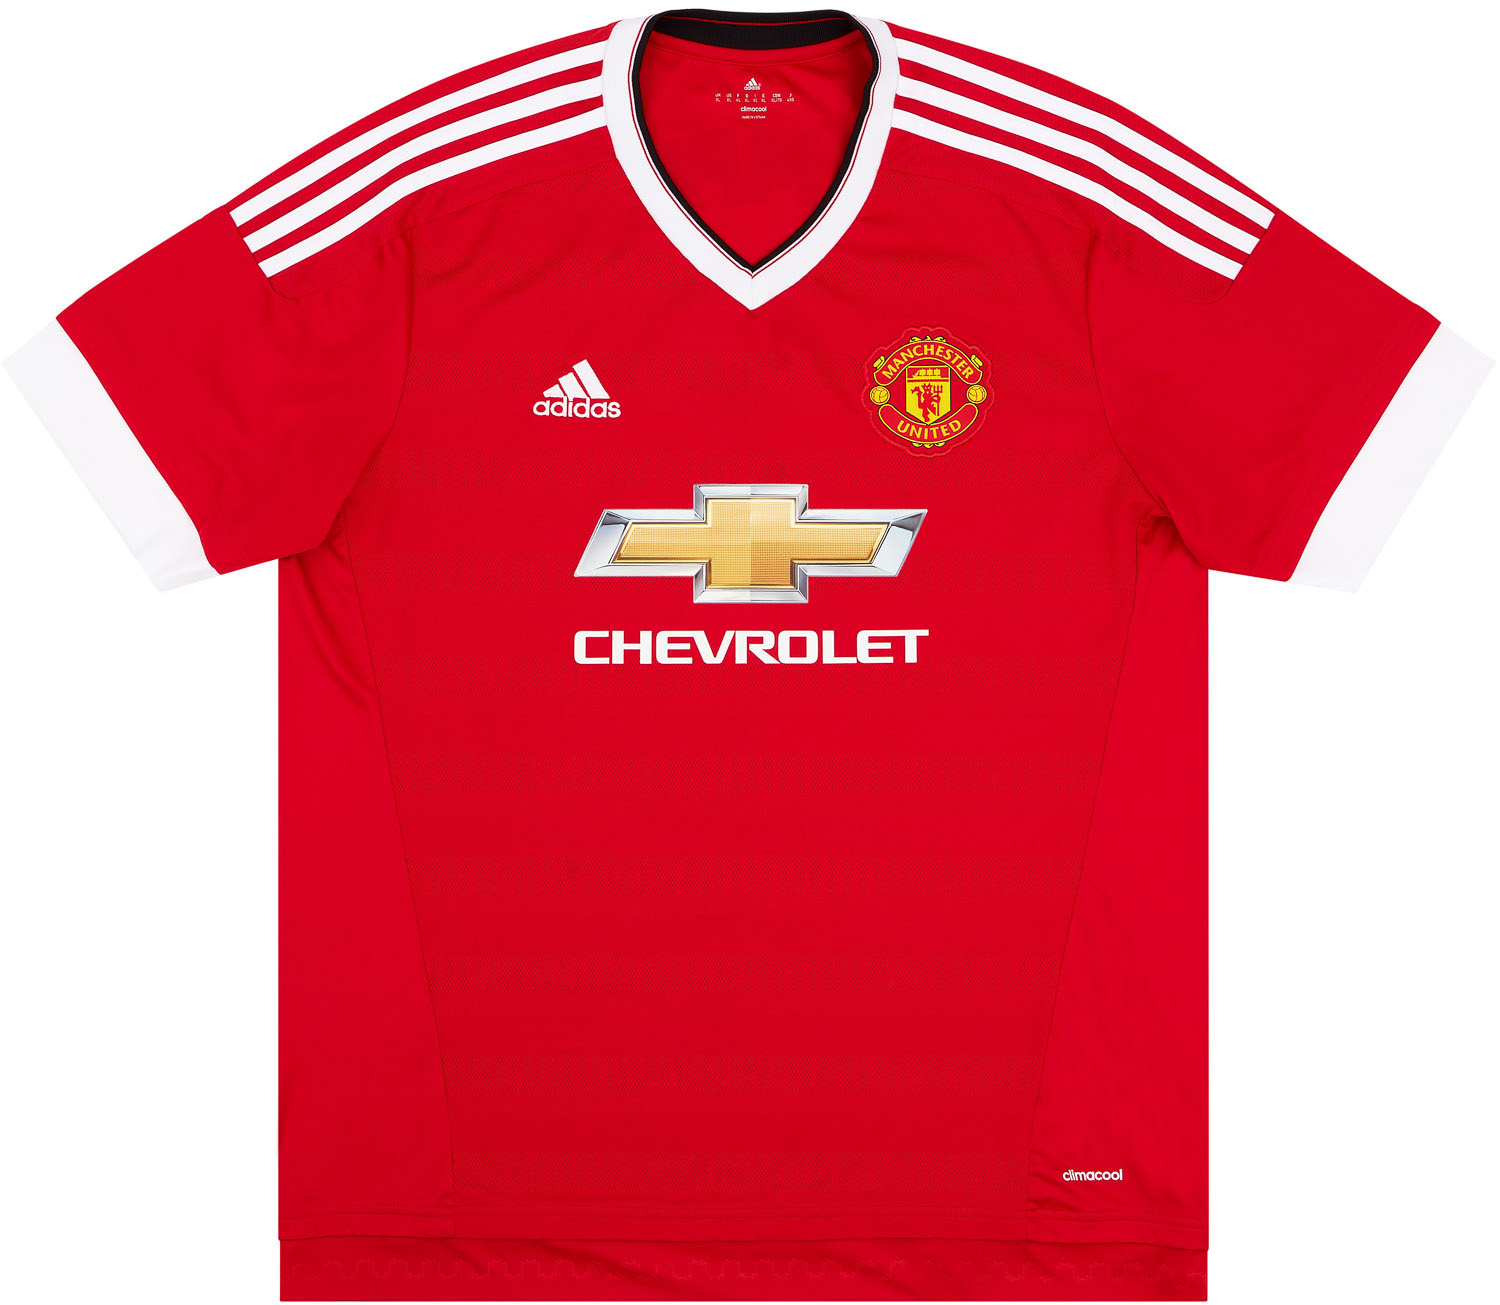 2015-16 Manchester United Home Shirt - 6/10 -